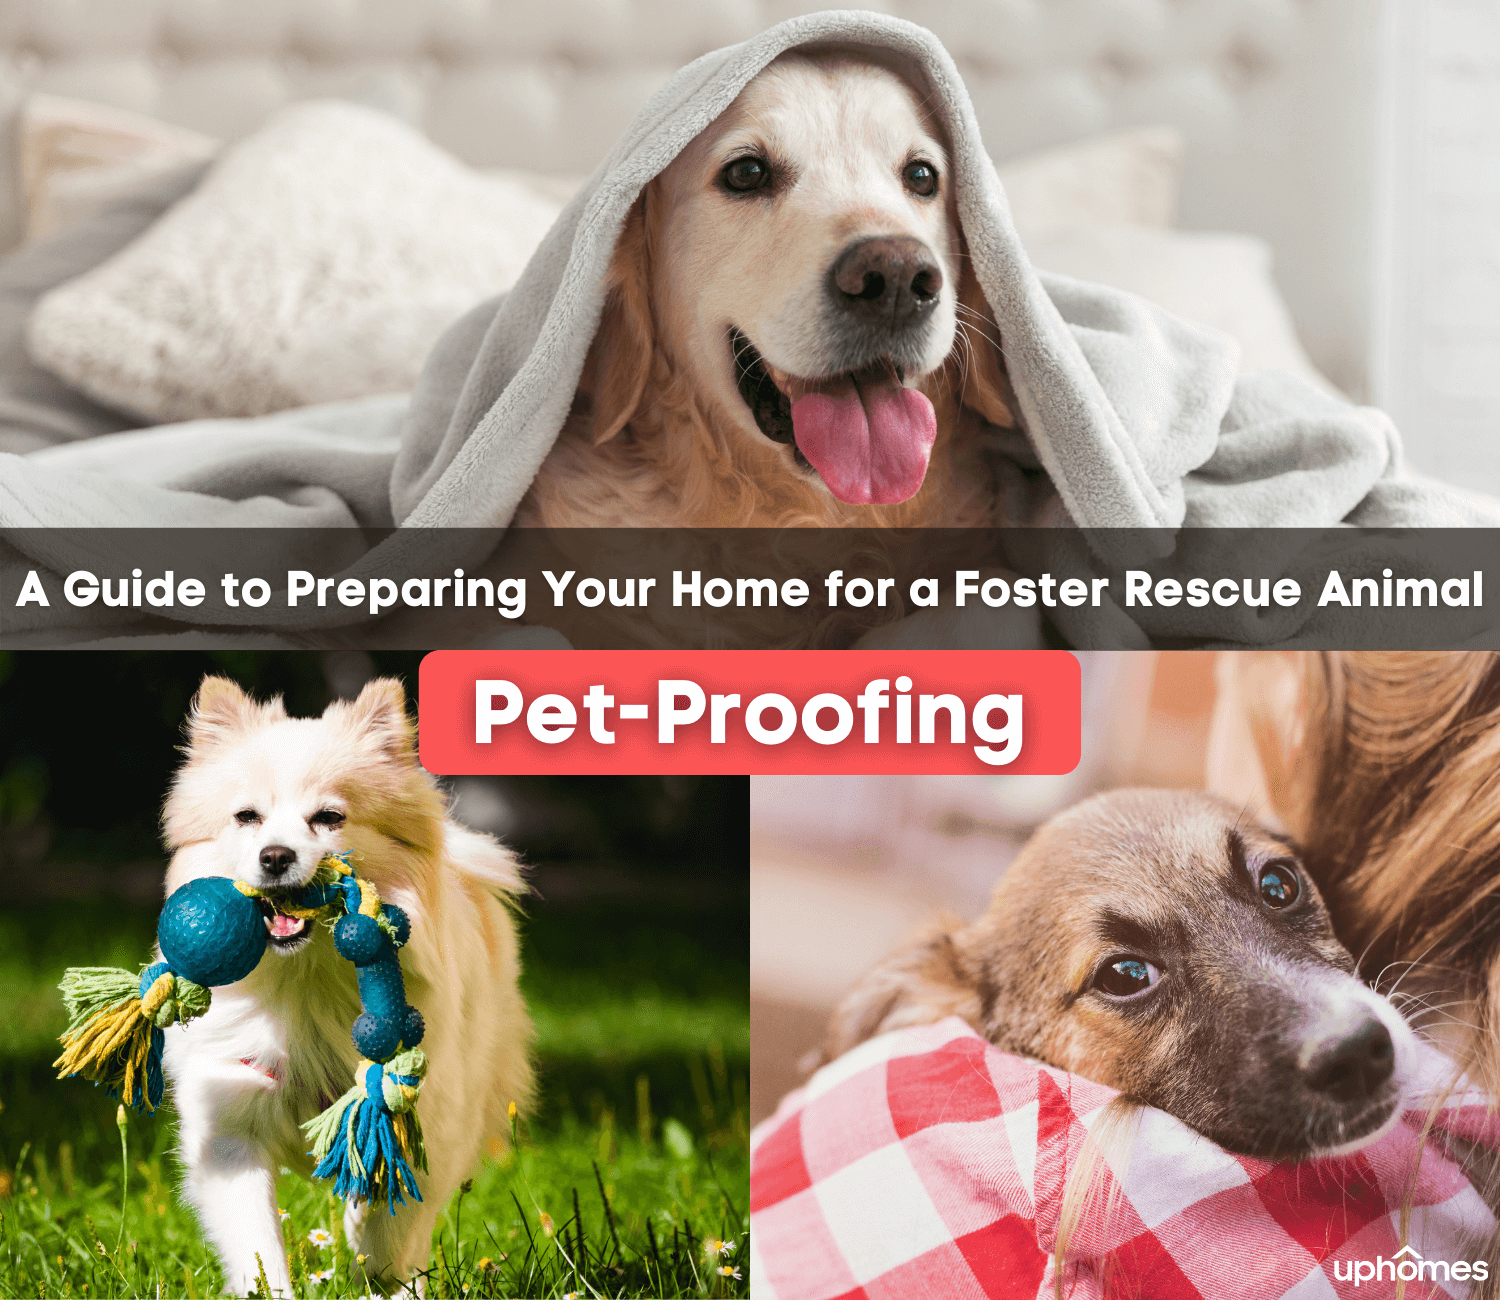 Pet-Proofing Your Home - A Guide to Preparing your home for a Foster Rescue Animal